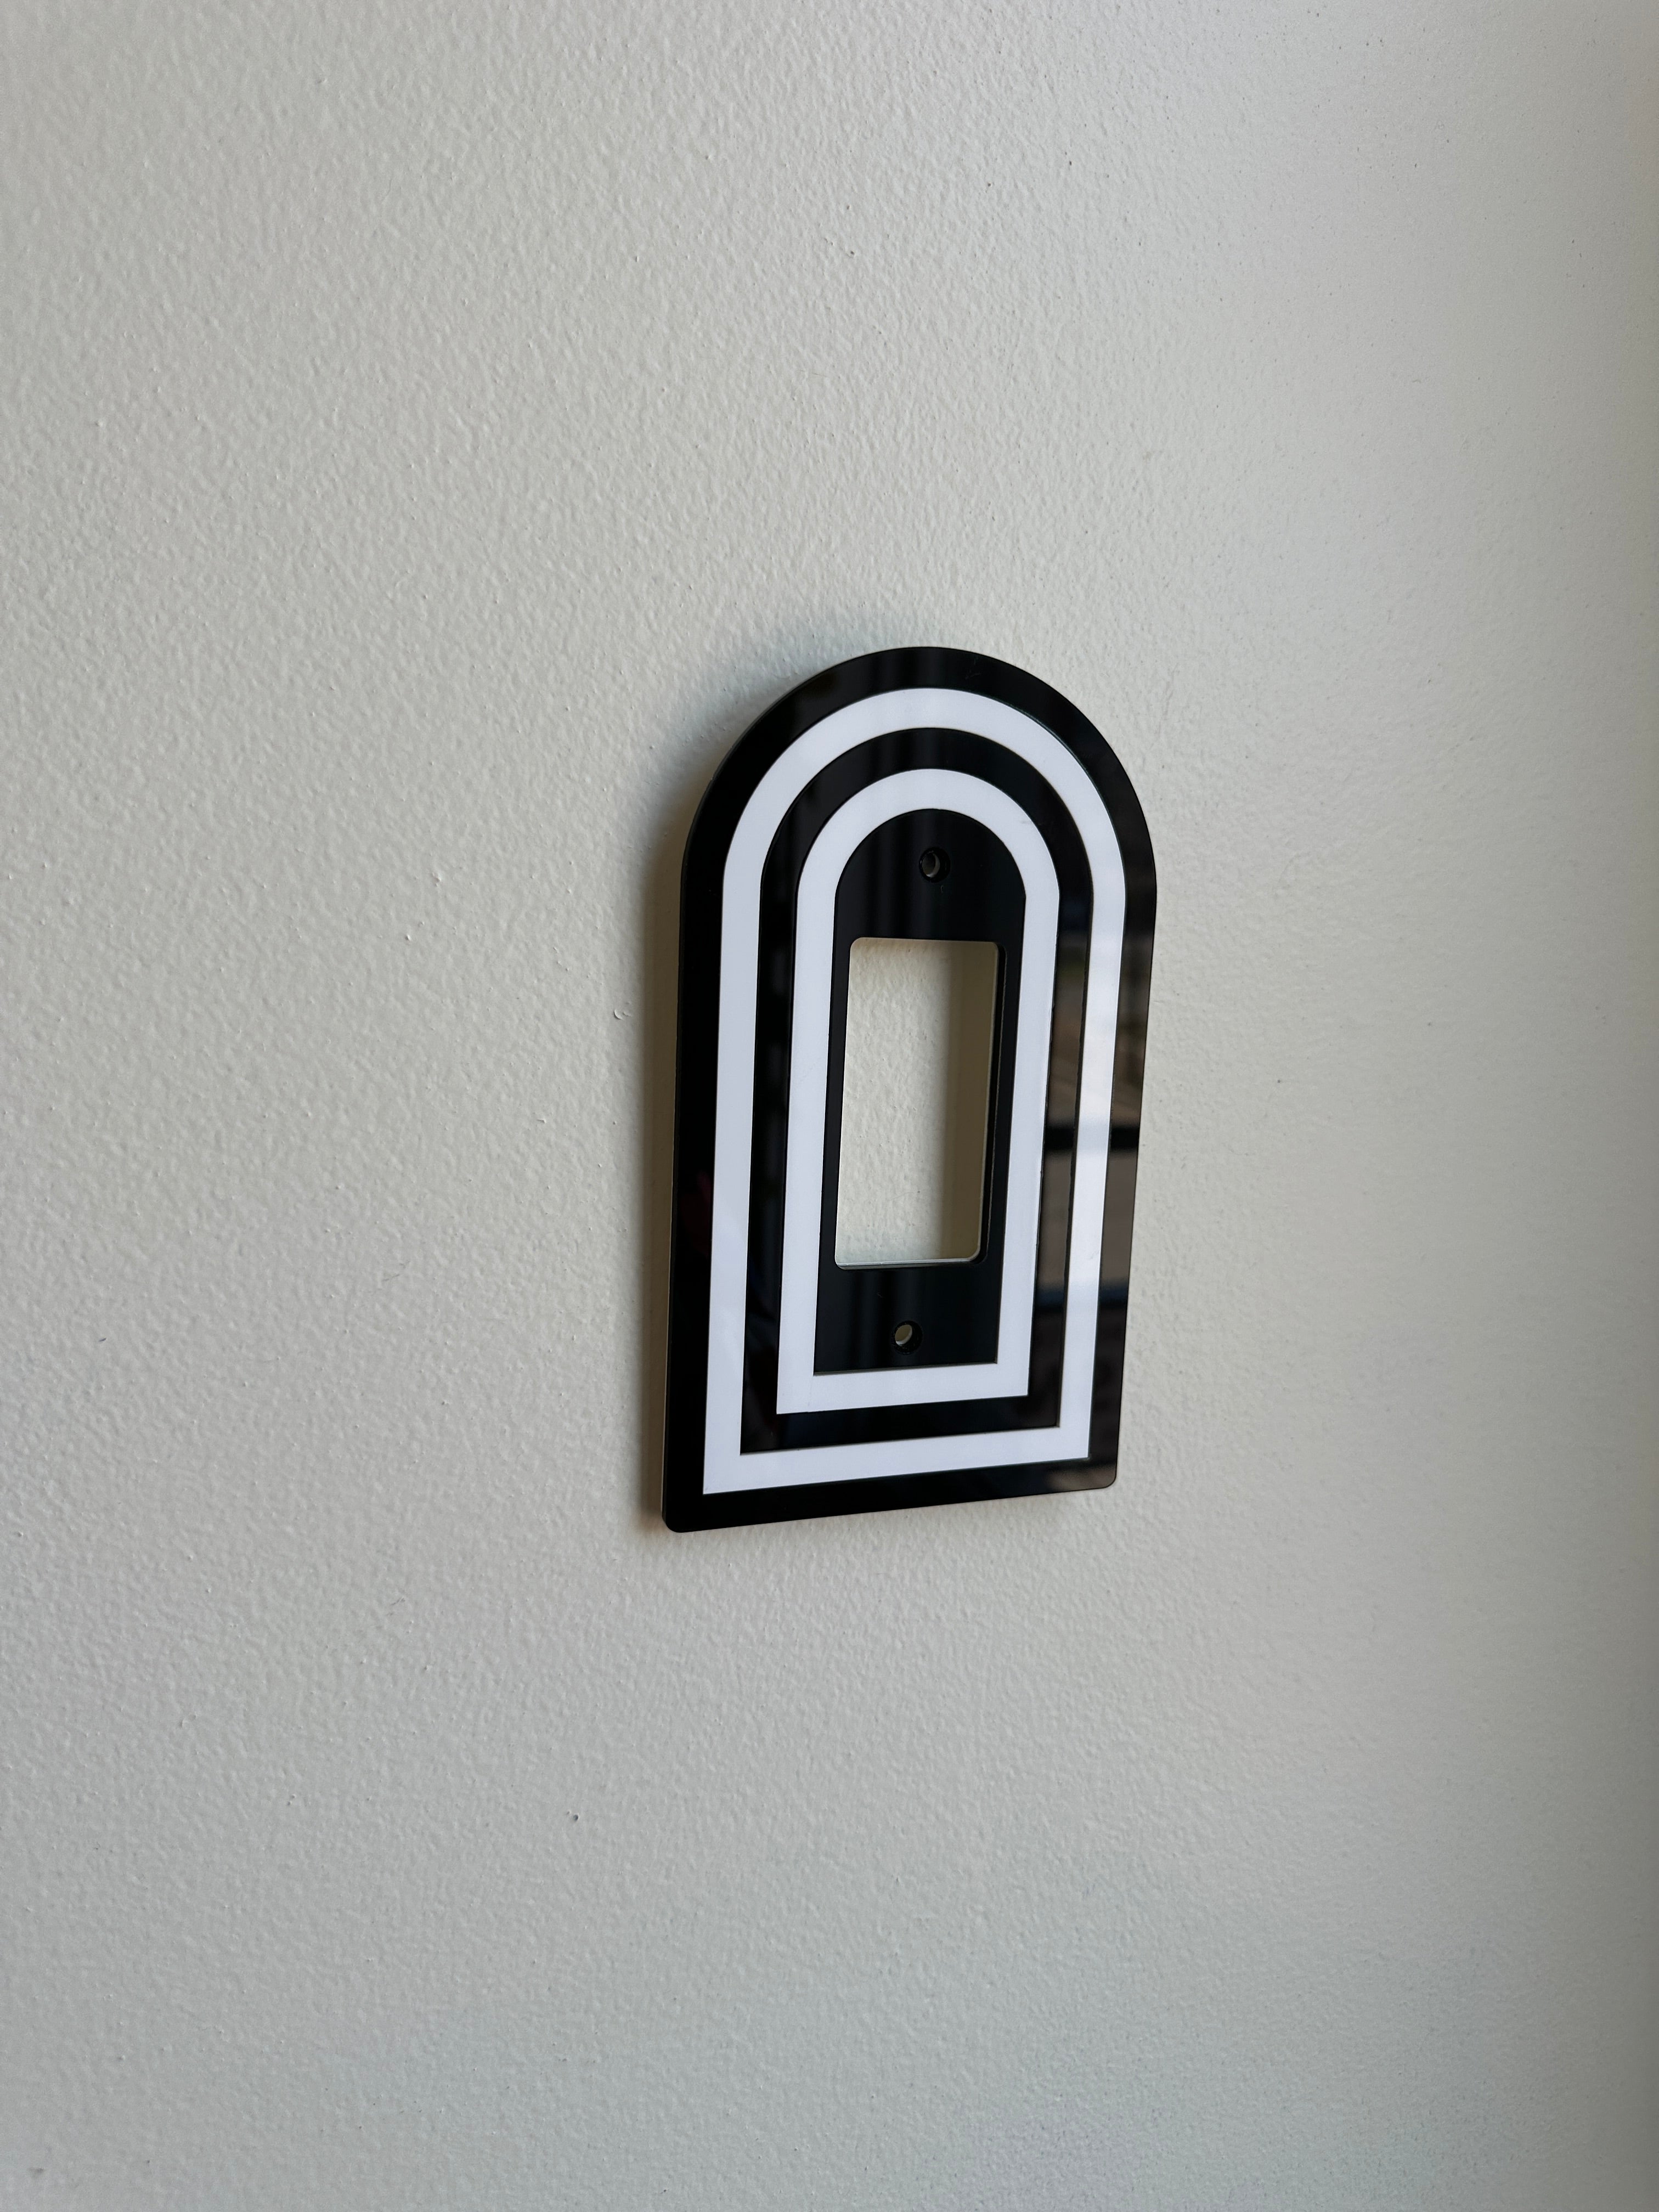 Black & White Layered Archway Light Switch Sample Sale